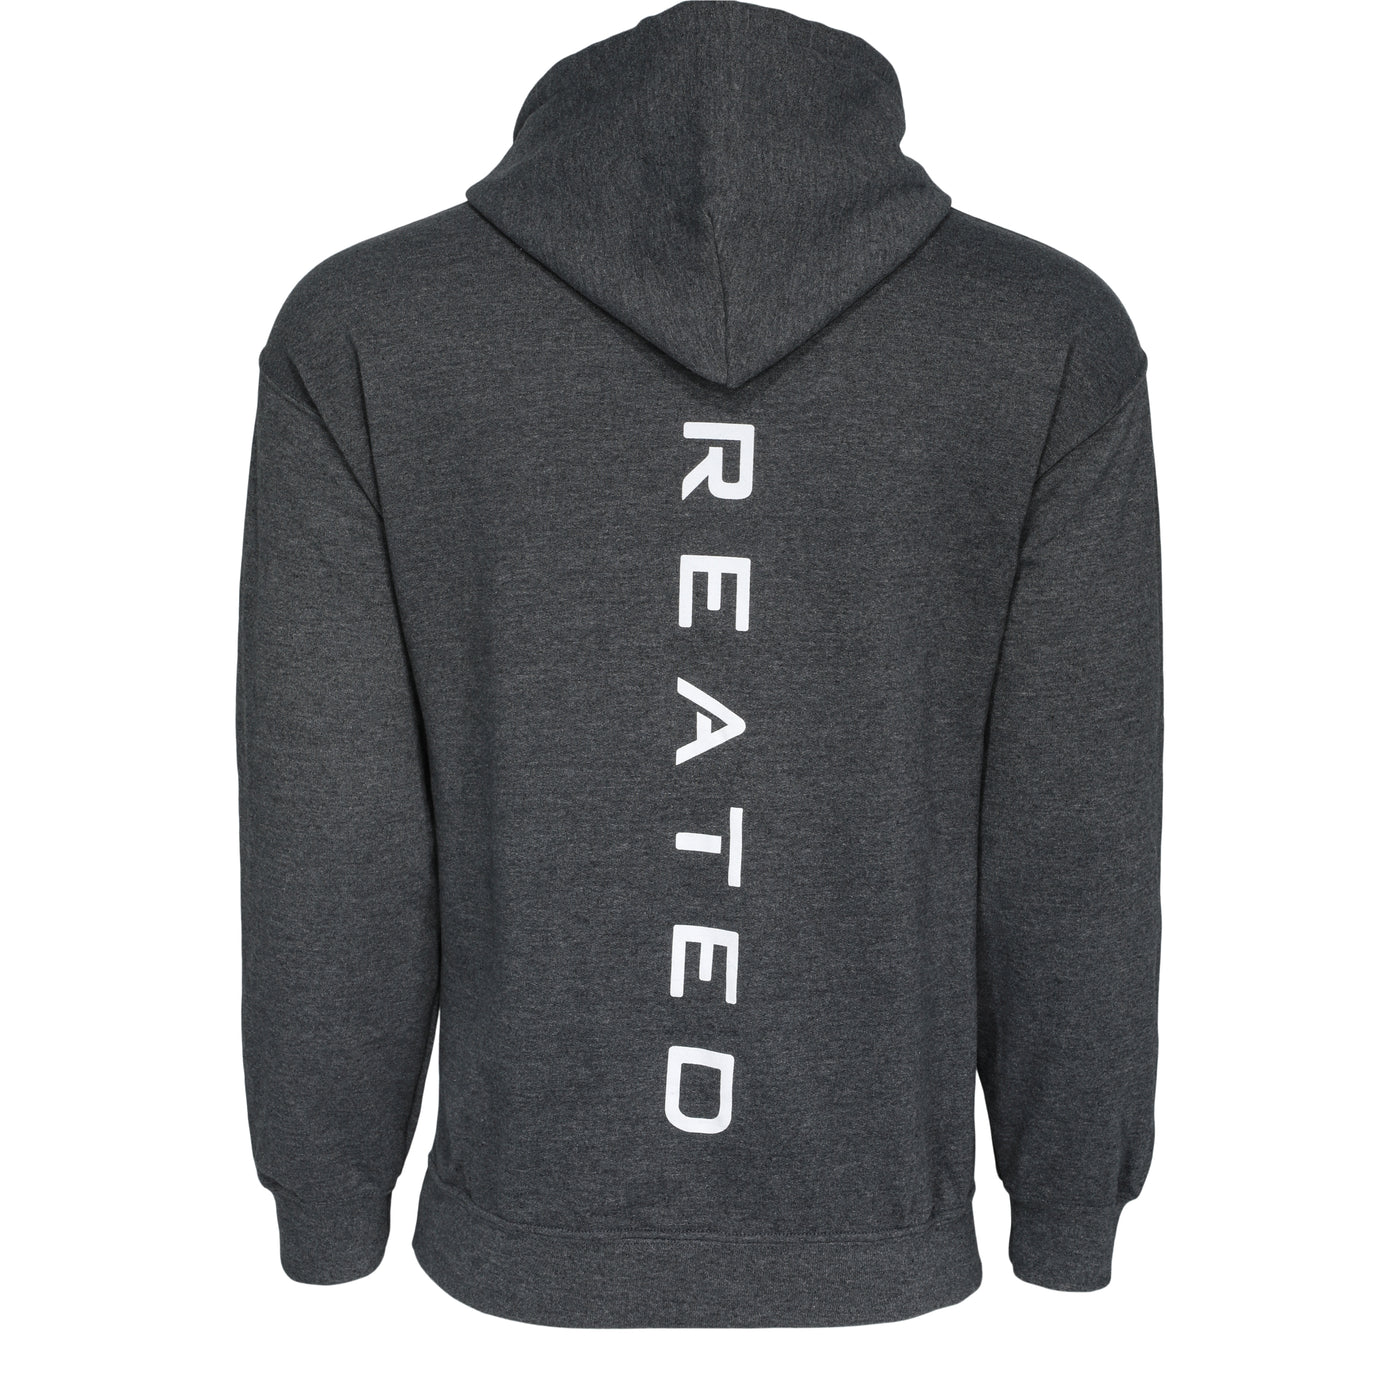 Created Relaxed dark heather Hoodie rear print view